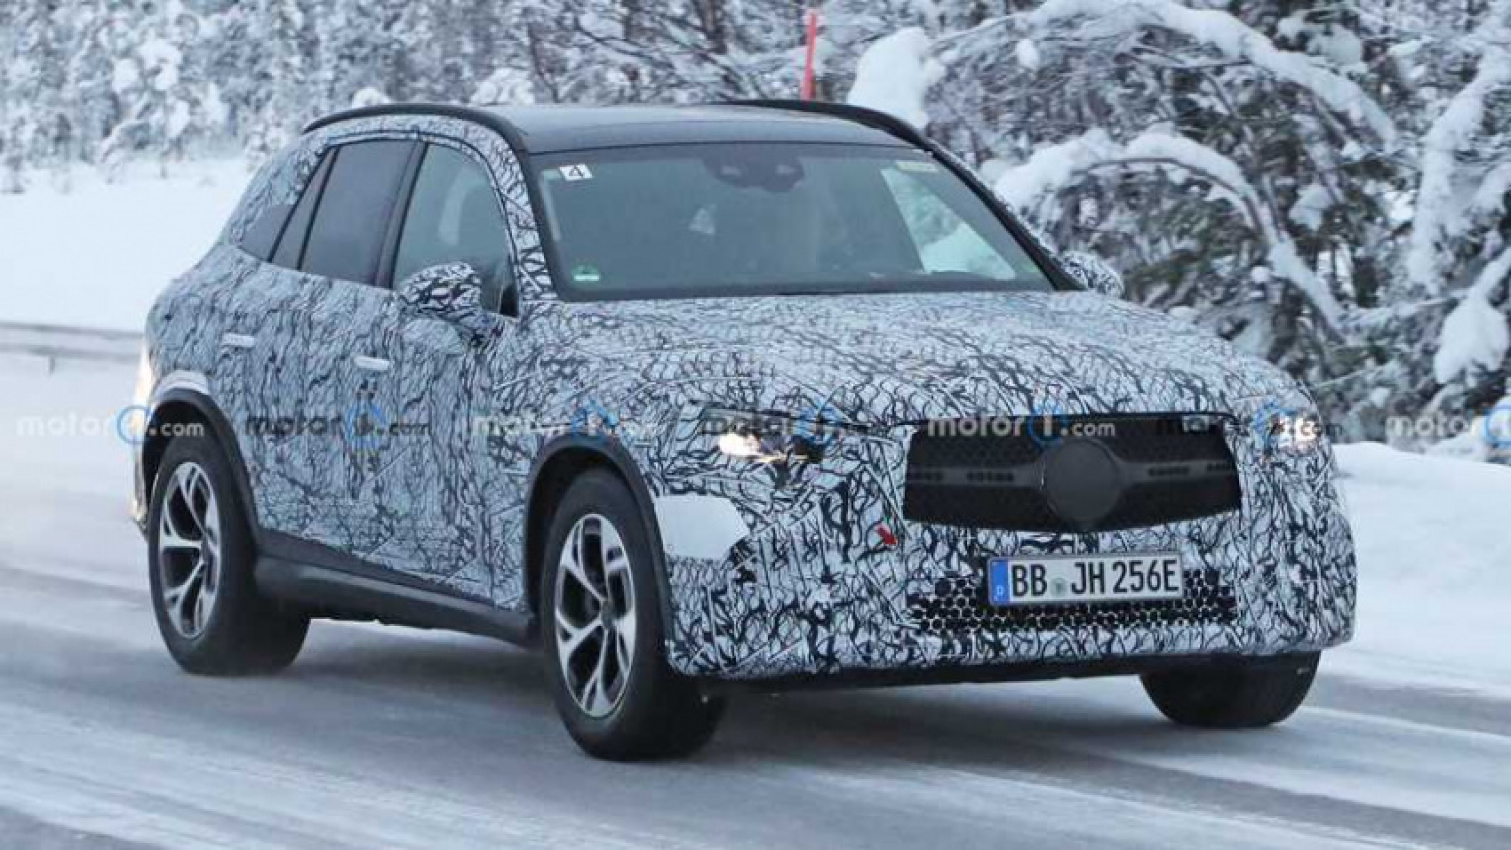 autos, cars, mercedes-benz, mercedes, 2023 mercedes glc spied without camo while being loaded into truck